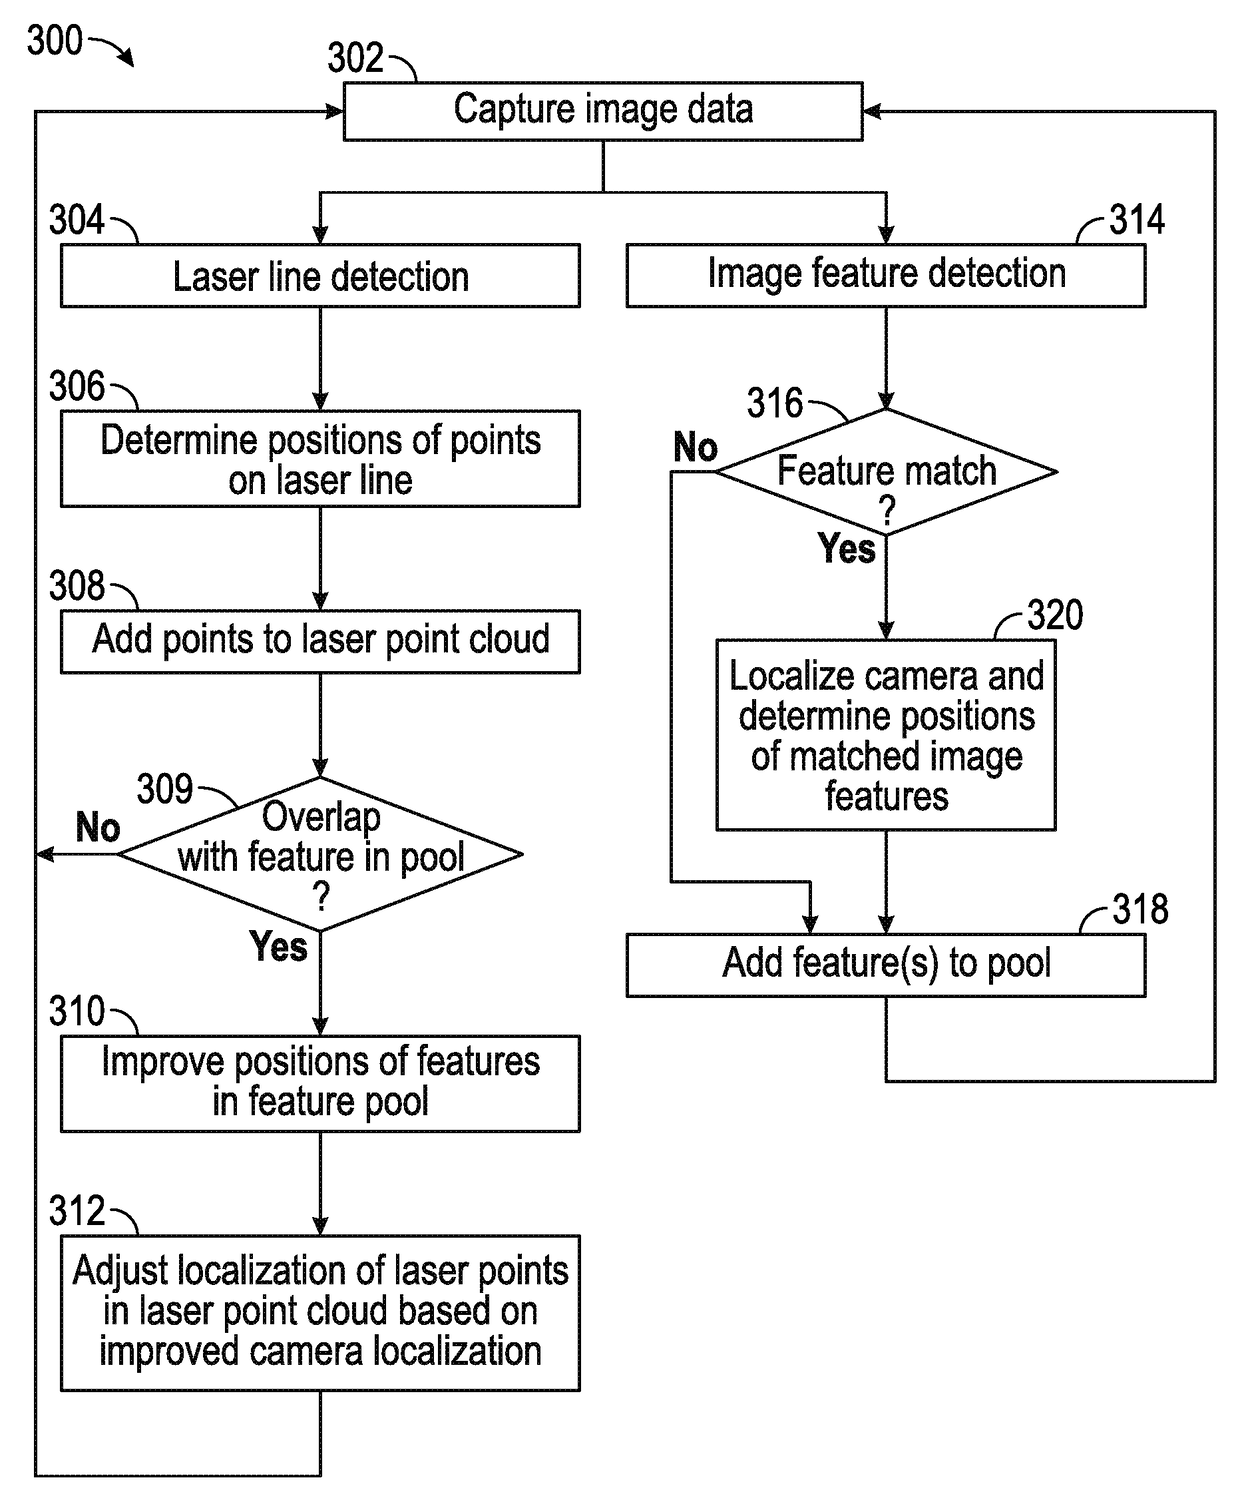 Laser-enhanced visual simultaneous localization and mapping (SLAM) for mobile devices